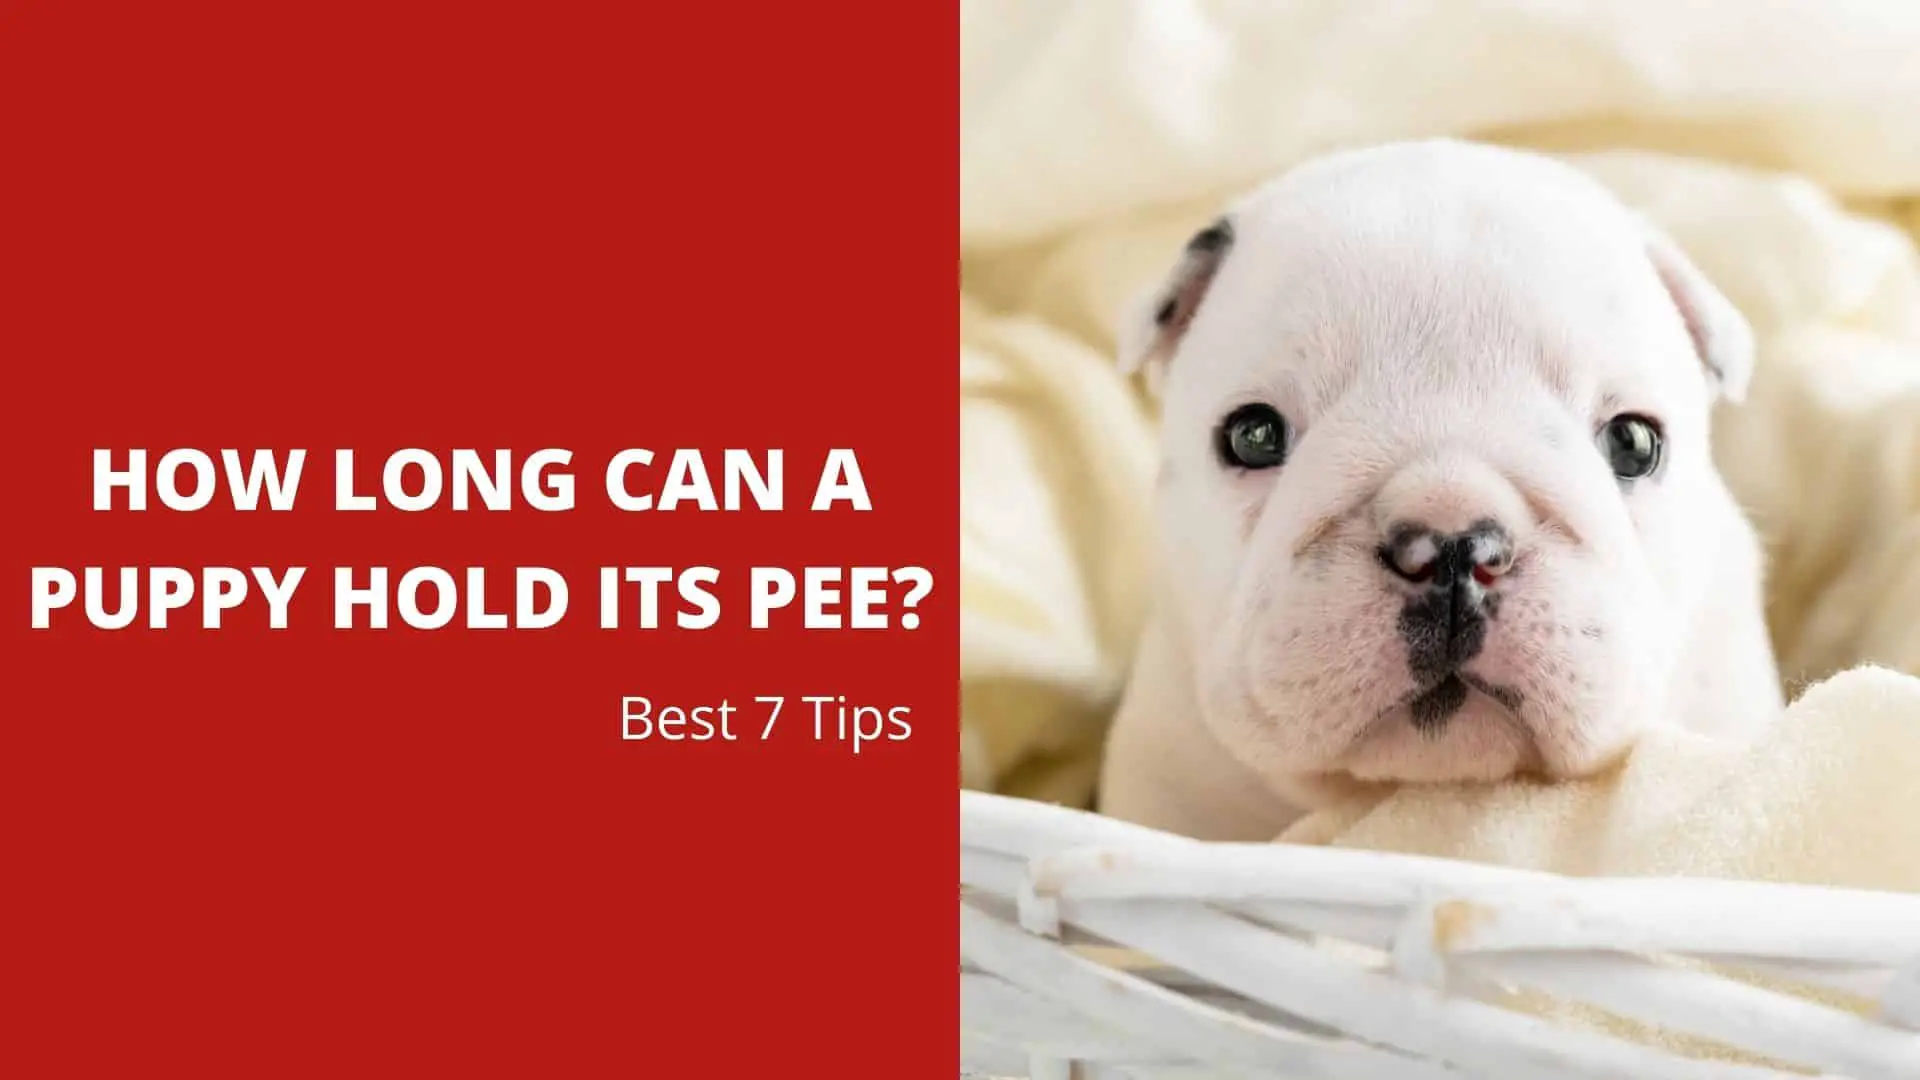 Mastering Potty Training: How Often Should A Puppy Pee?